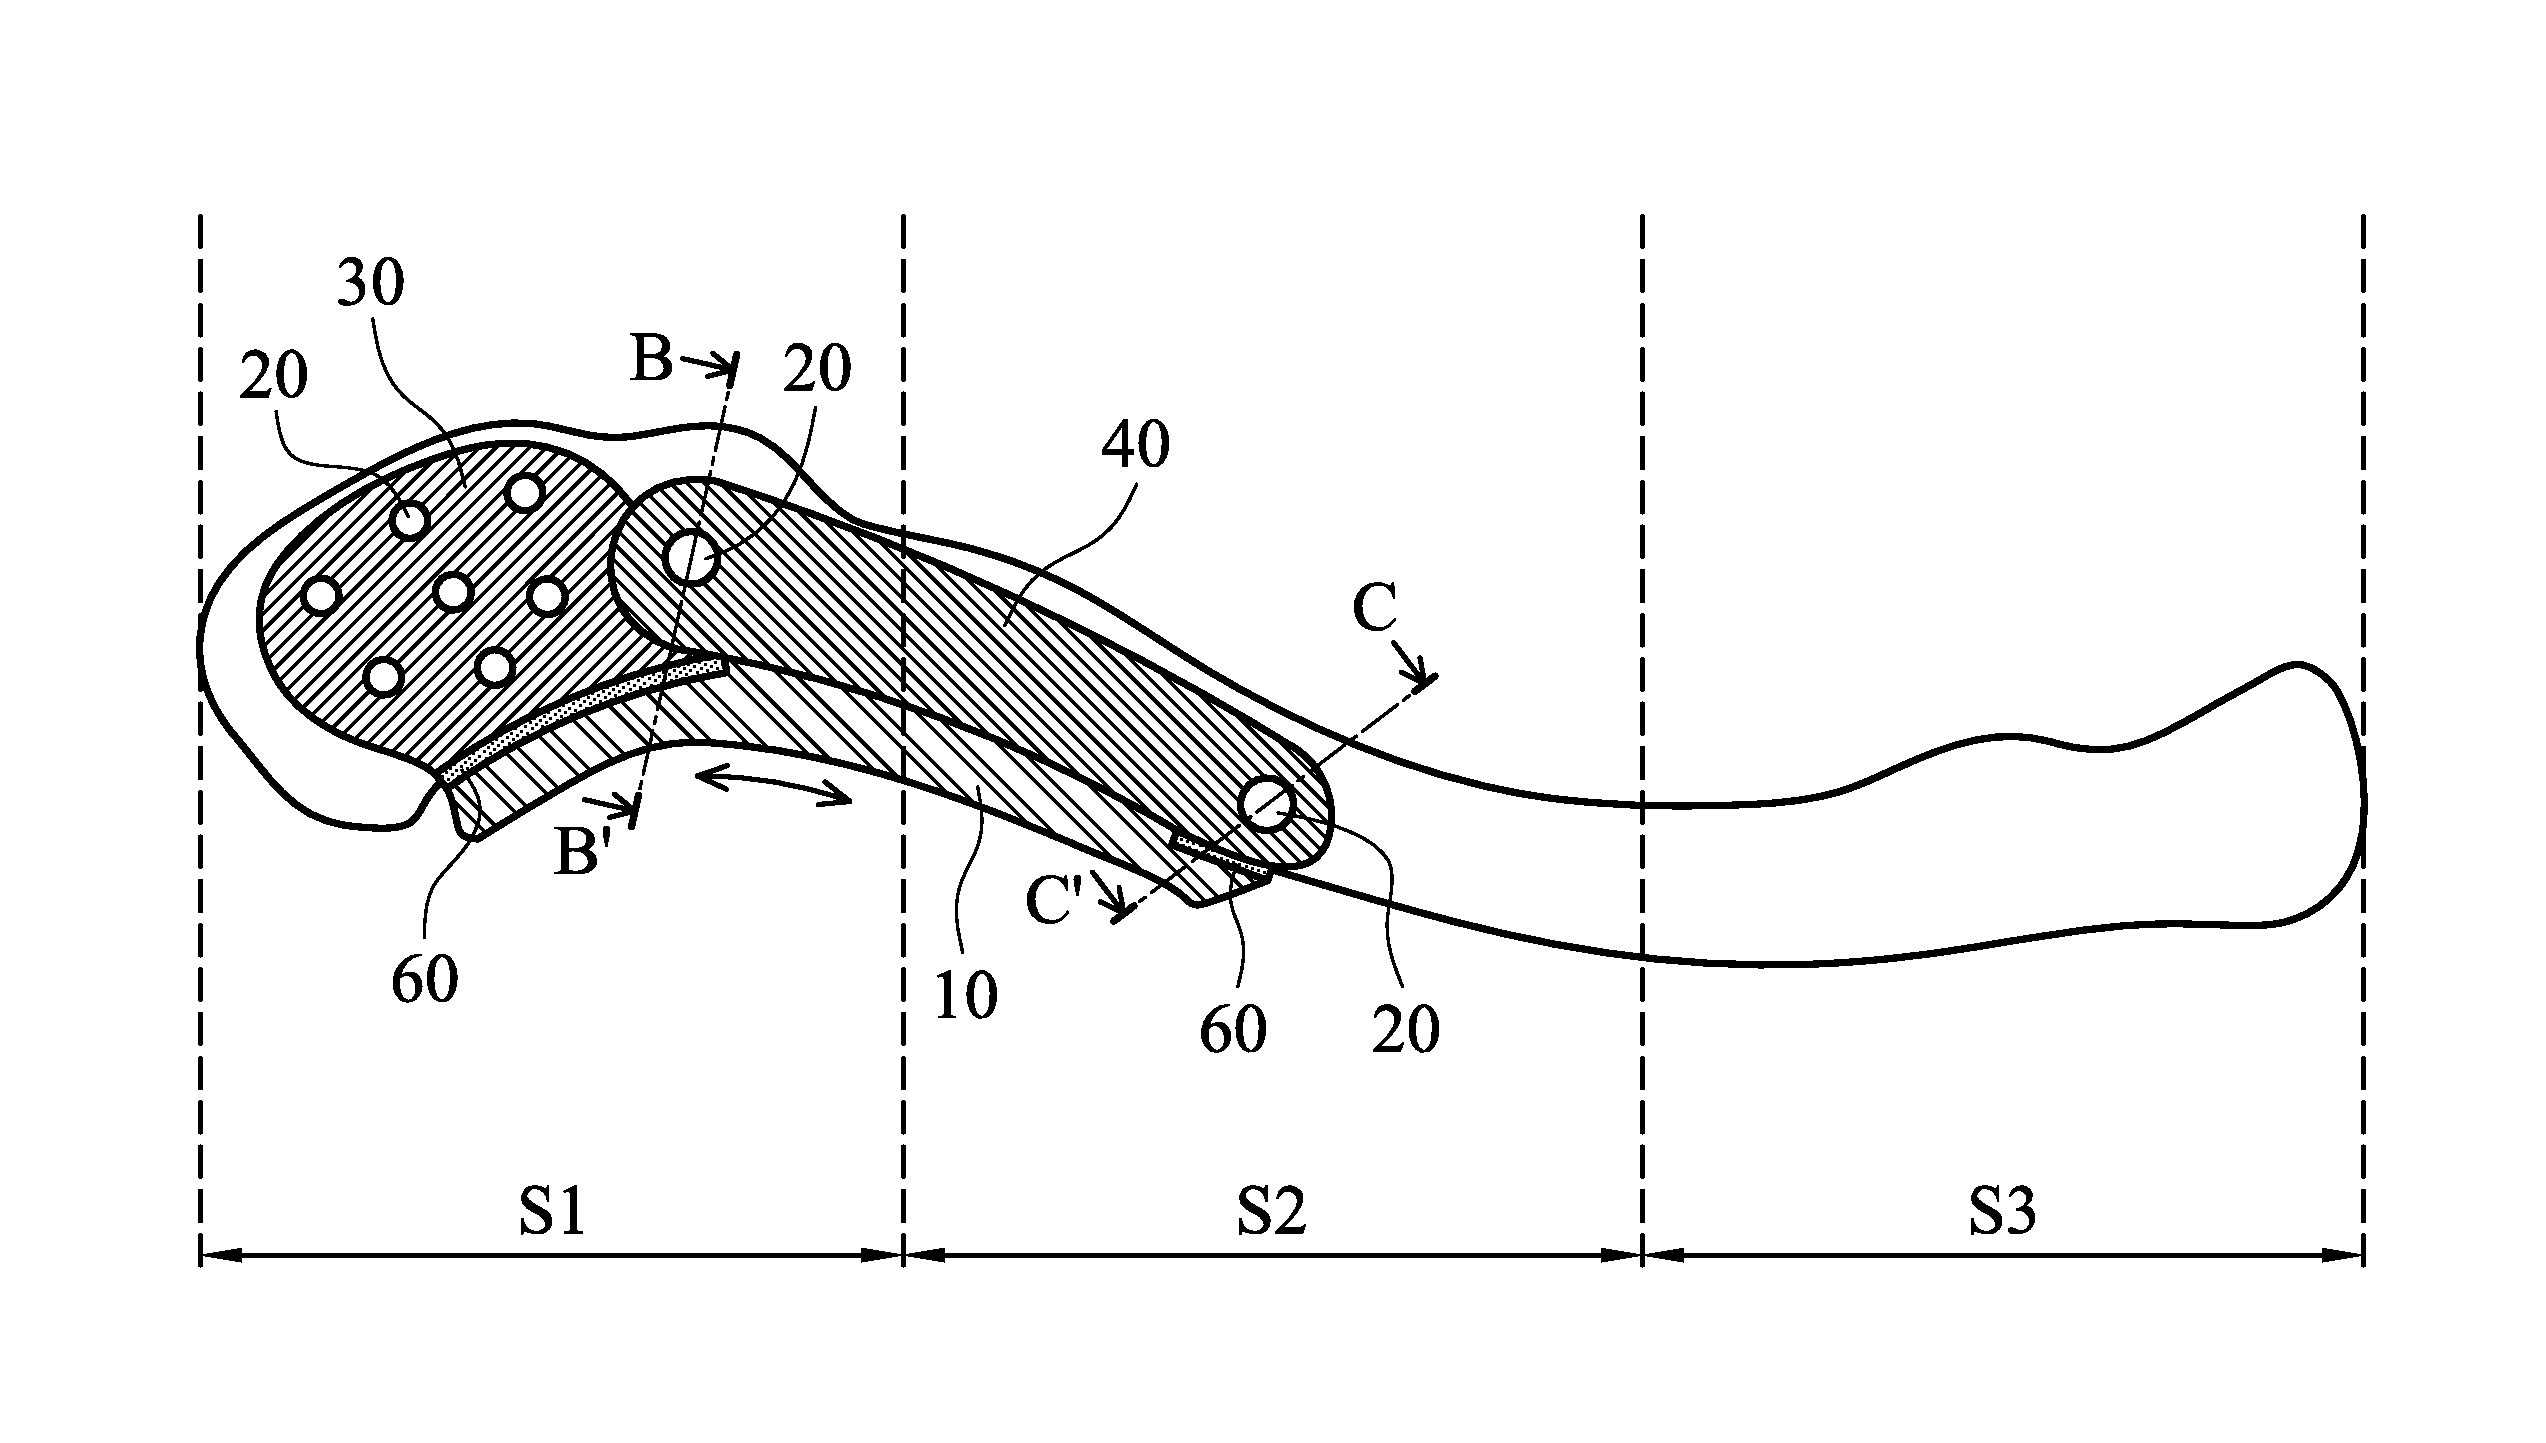 Three-dimensional fracture fixation device for nerve protection